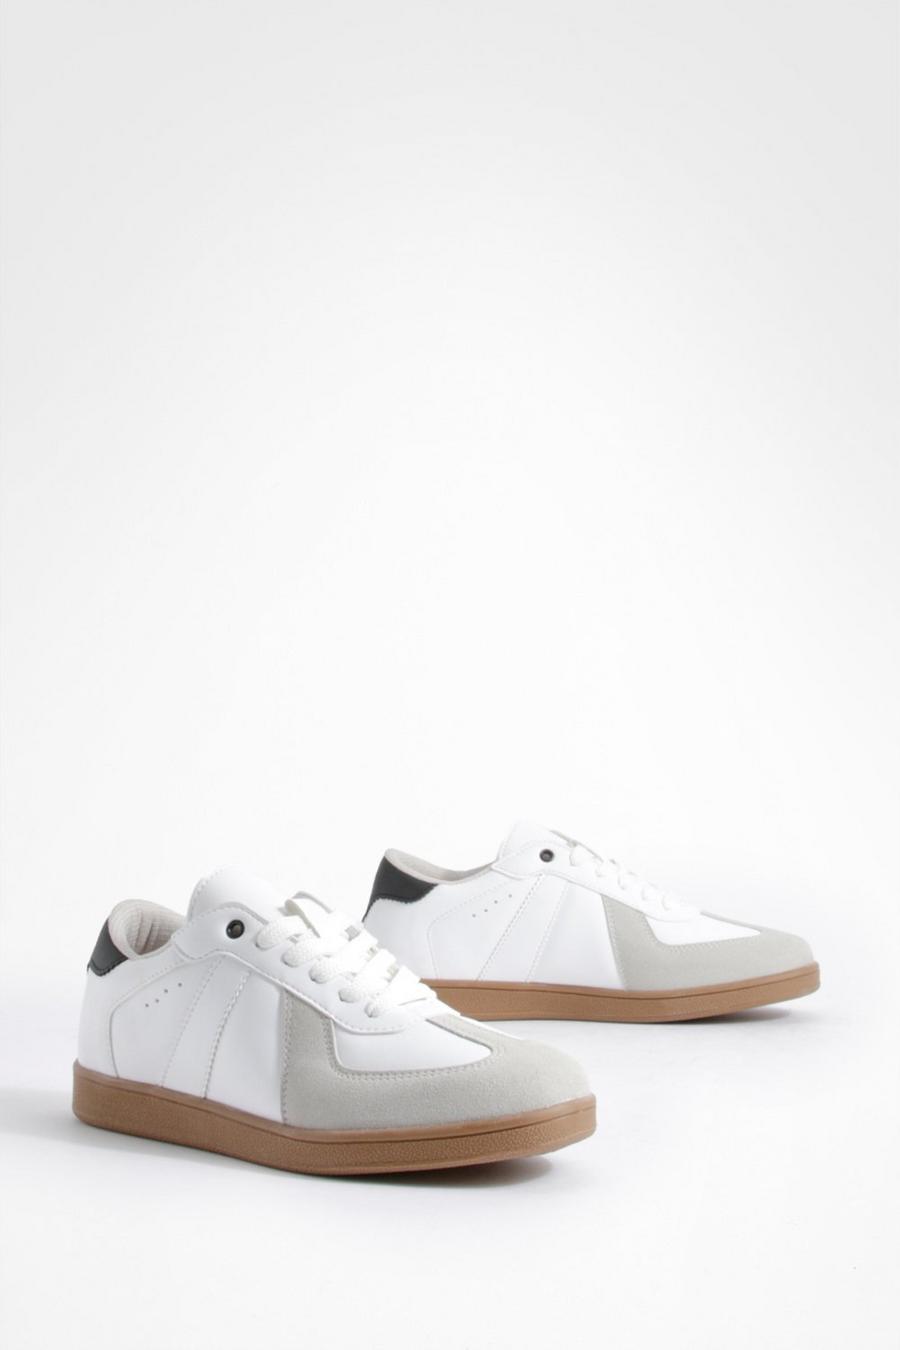 Contrast Panel Gum Sole Flat Sneakers image number 1